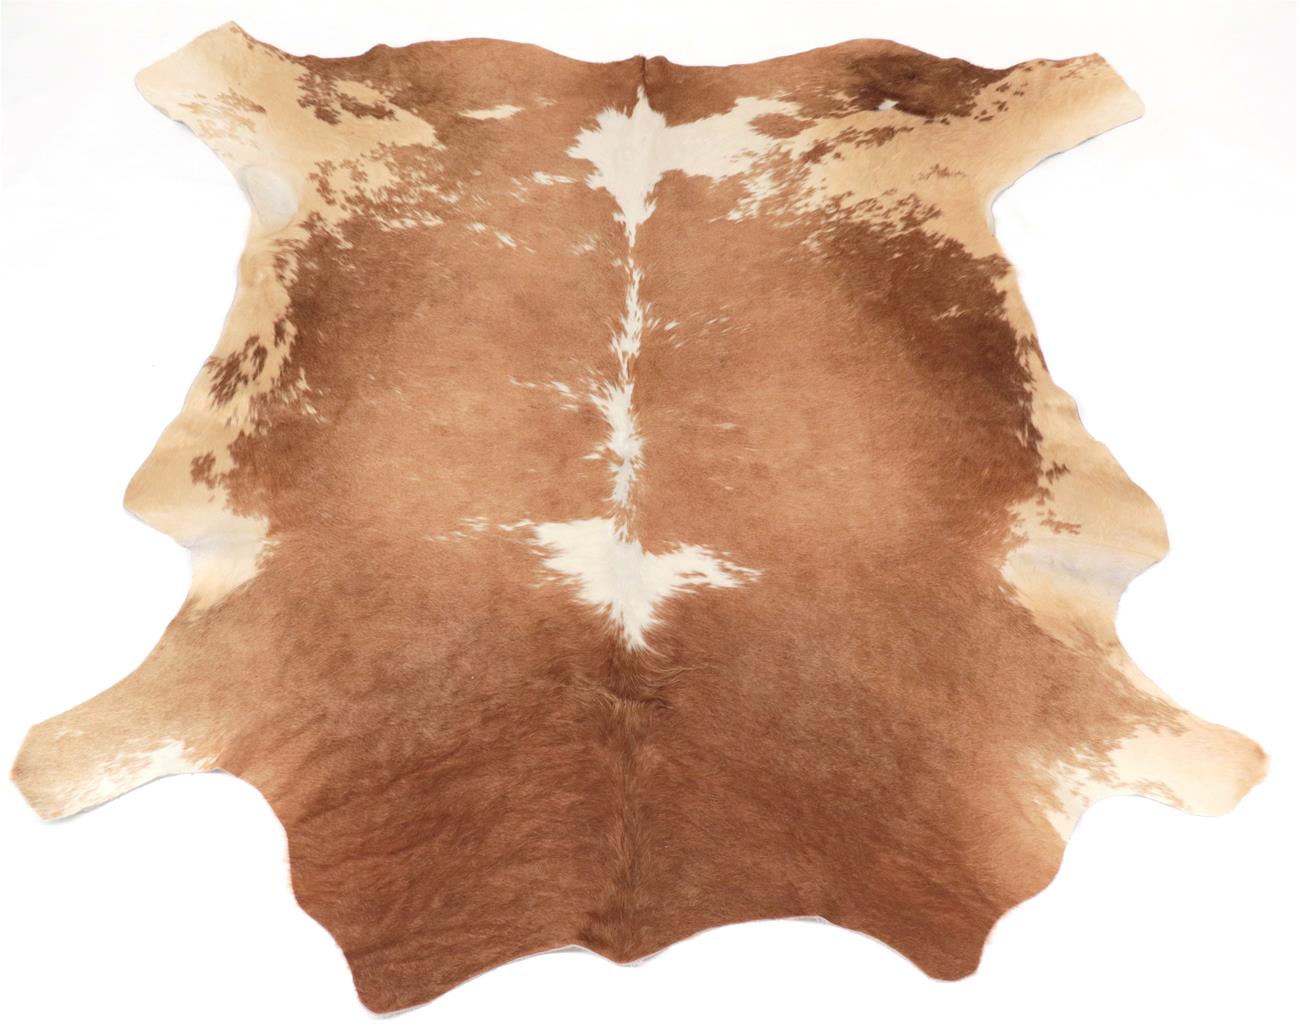 Lot 18 - Skins/Hides: South African Nguni Cow Hide (Bos taurus), modern, AA Grade, excellent quality,...